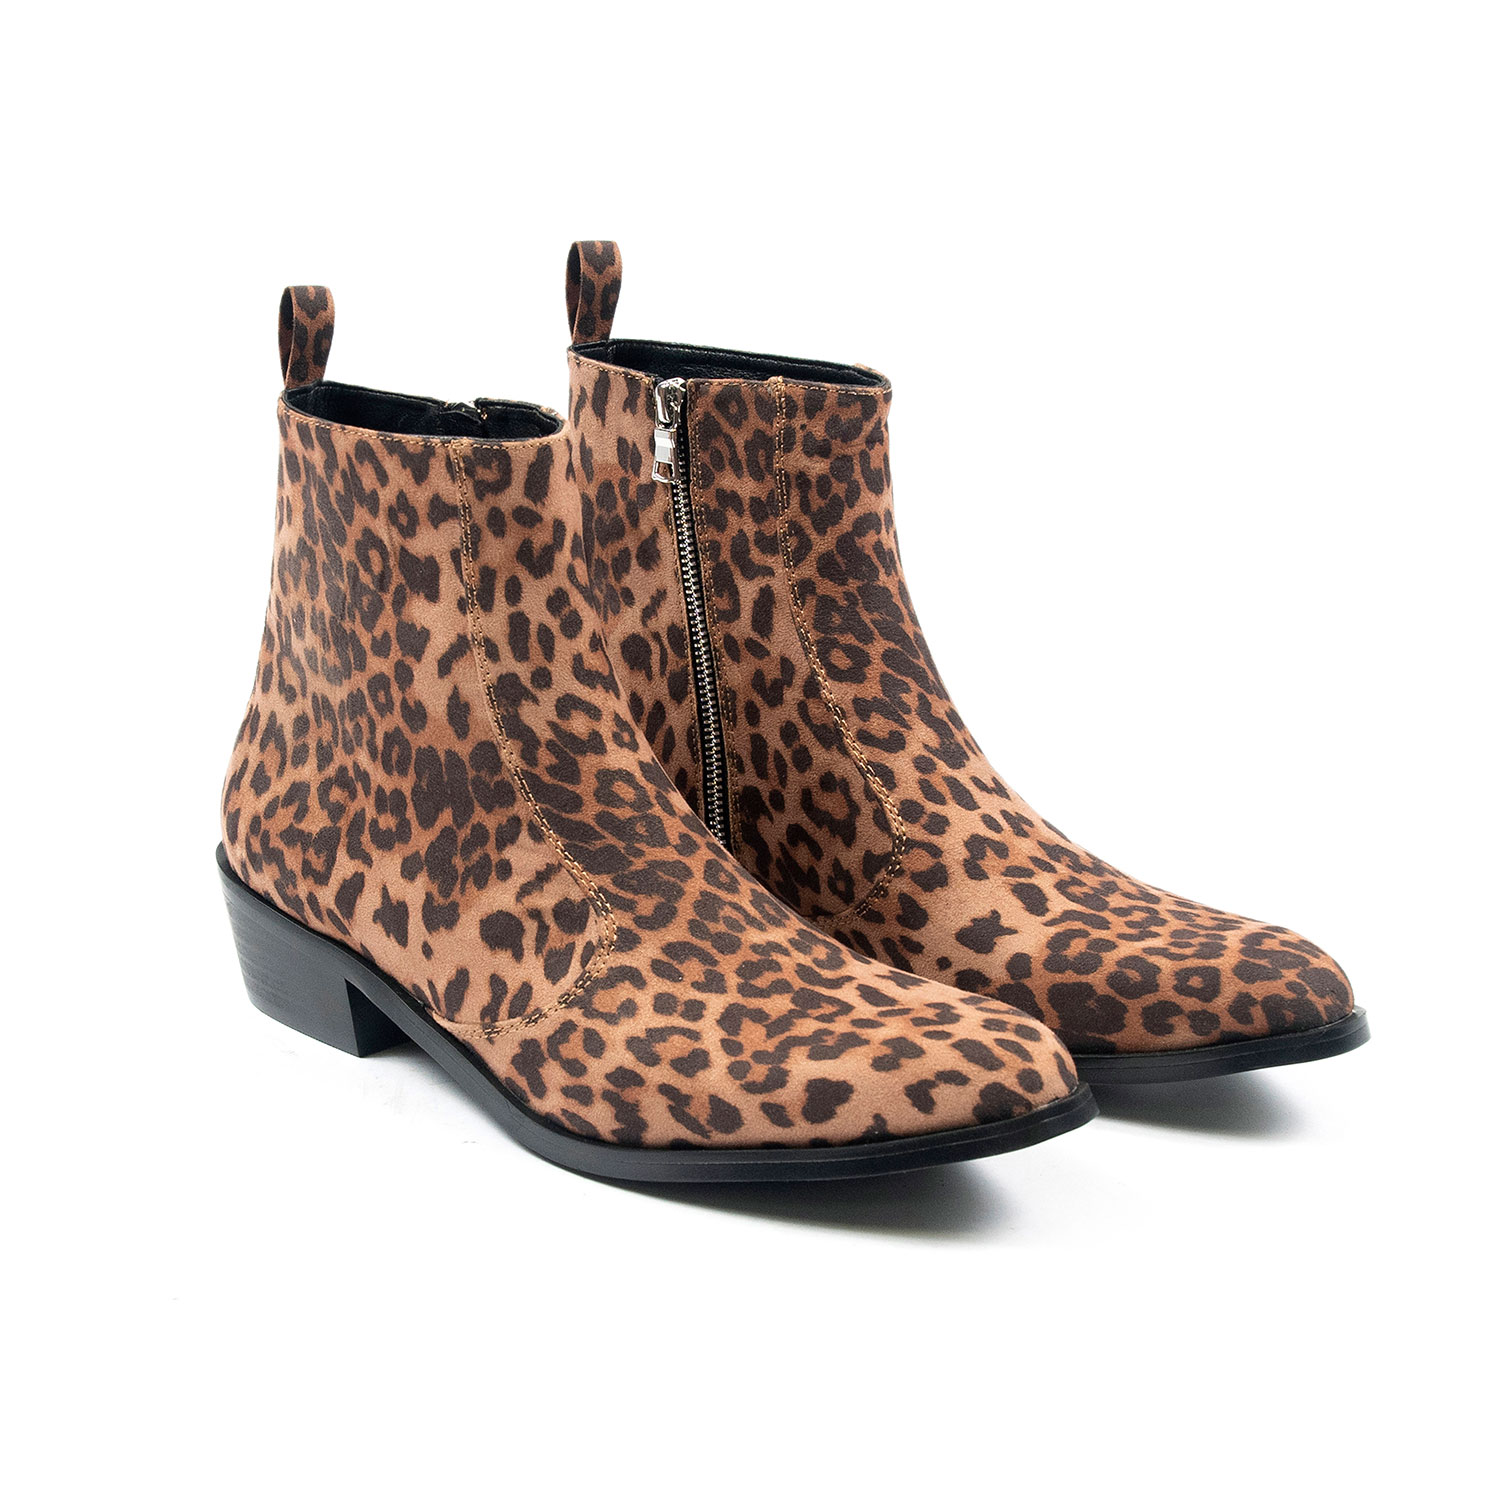 Vegan Richards - Leopard Zip Boots | Straight To Hell Apparel